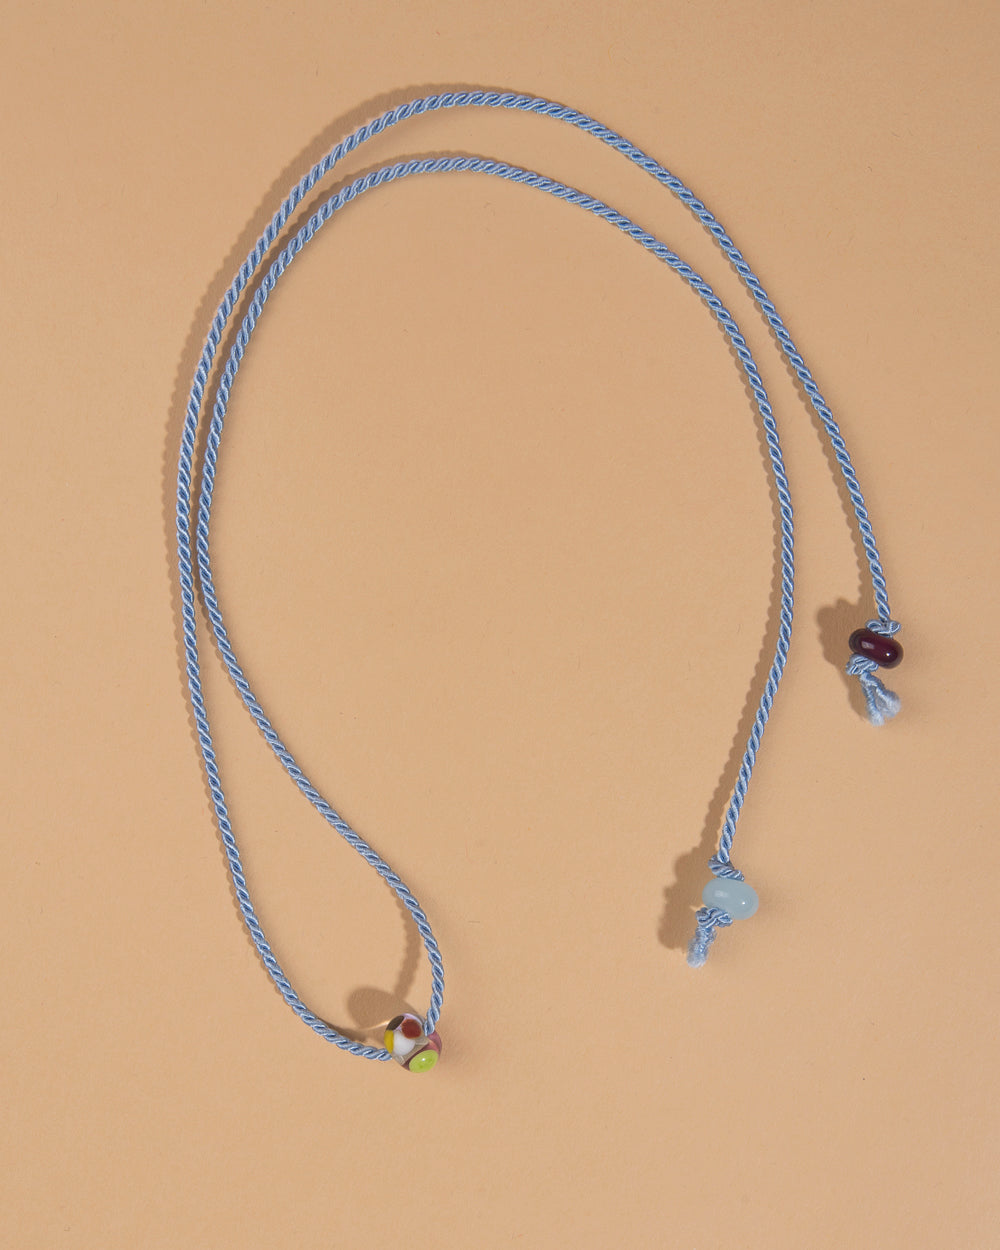 Glass Bead and Rope Necklace – Small Multi Mix